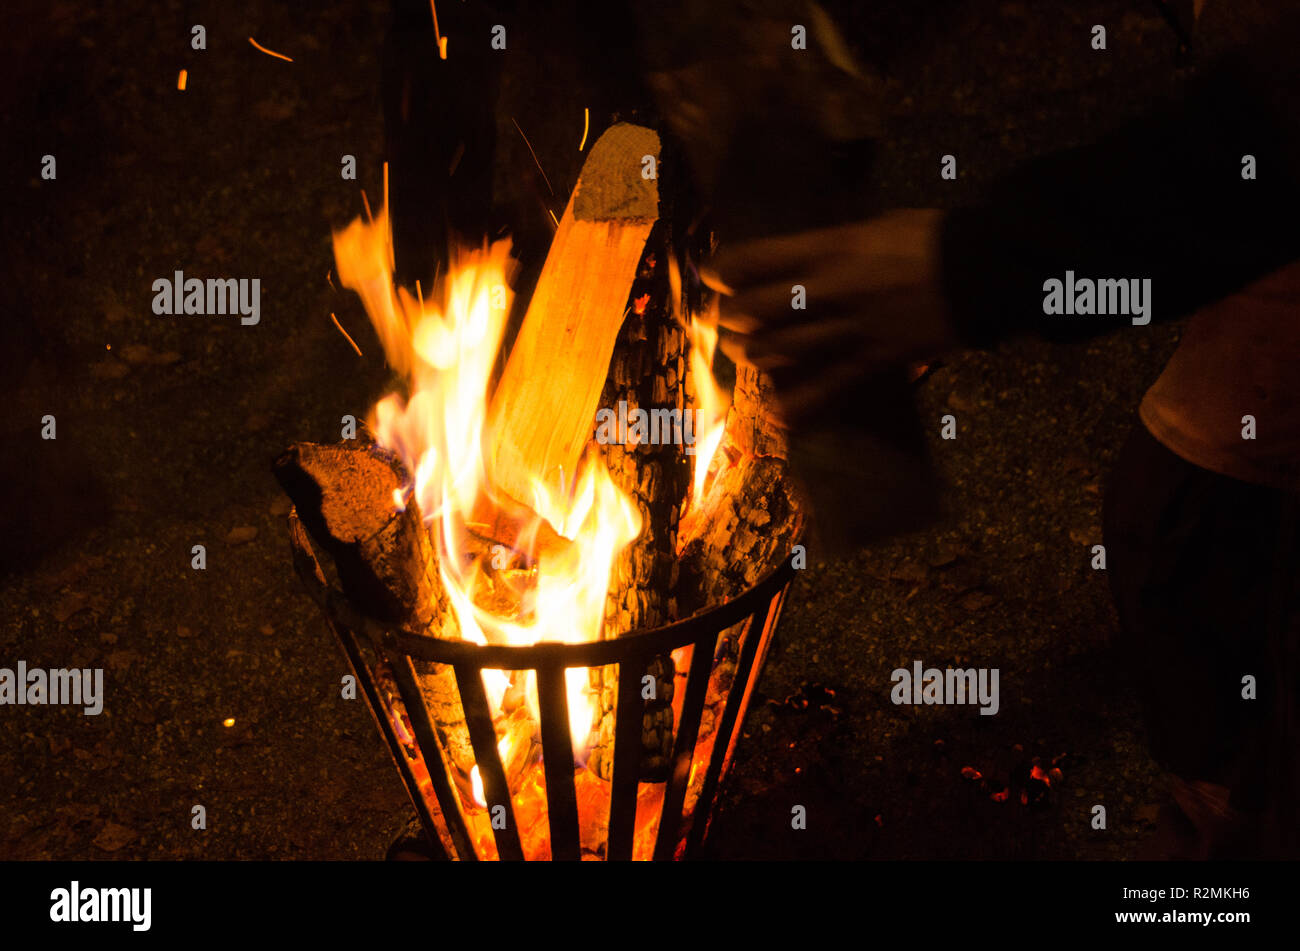 Fireplace of iron with burning logs during a cold evening for warmth. One puts on another log. Stock Photo